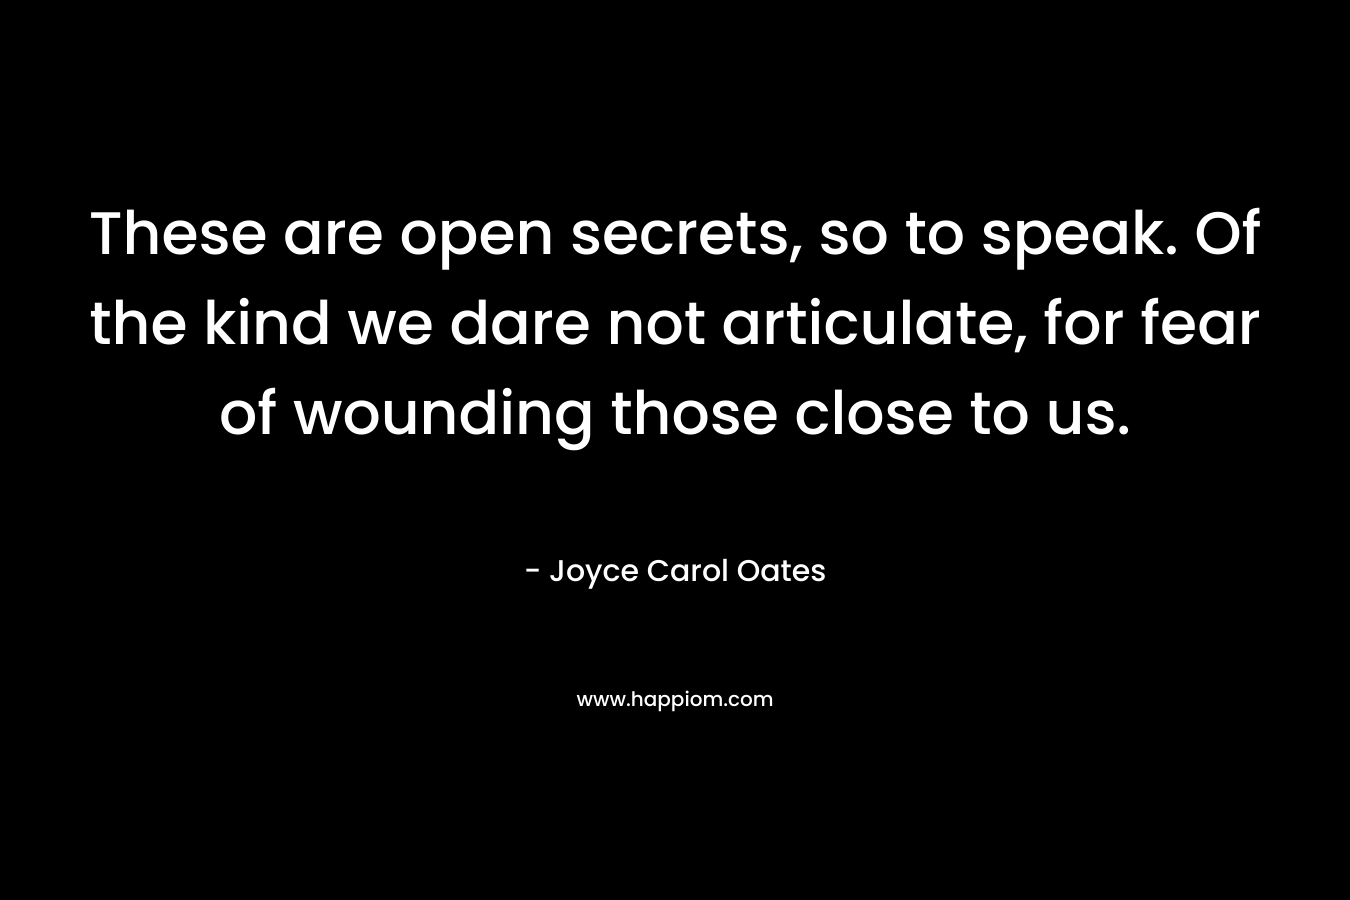 These are open secrets, so to speak. Of the kind we dare not articulate, for fear of wounding those close to us. – Joyce Carol Oates